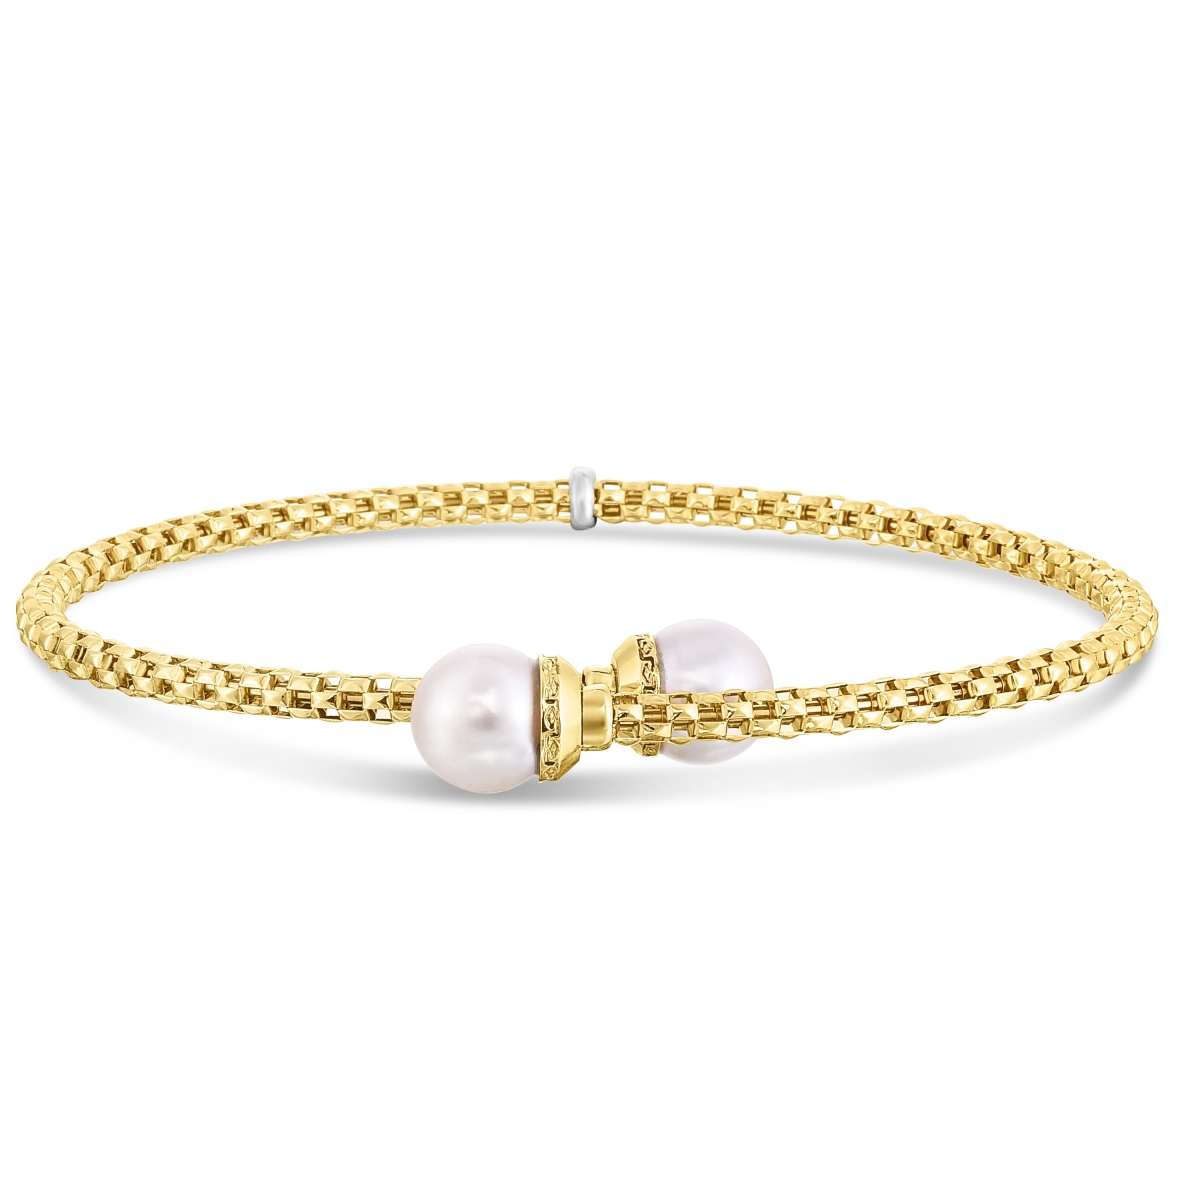 BG3533 14K Yellow Gold Polished Bypass Popcorn Bangle with 8.5 mm Ball River White Pearl -  Royal Chain